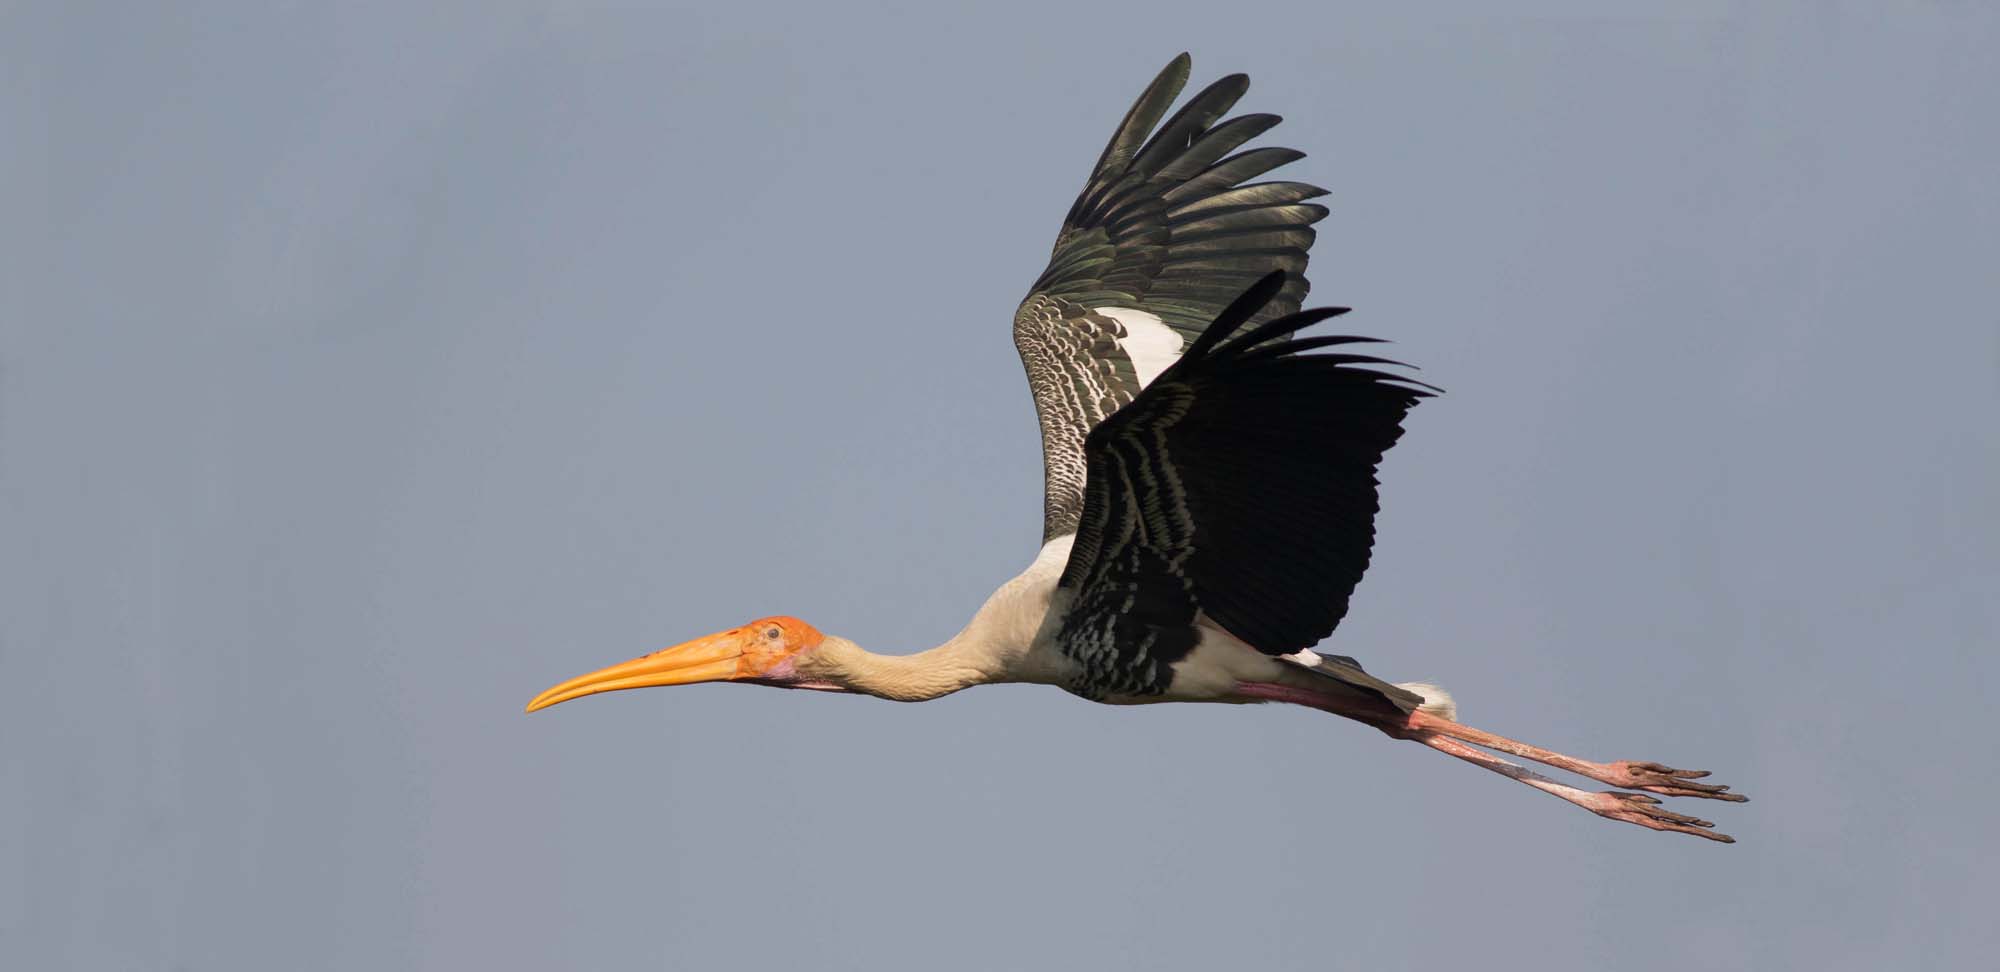 Painted Stork Field Guides Birding Tours Cambodia